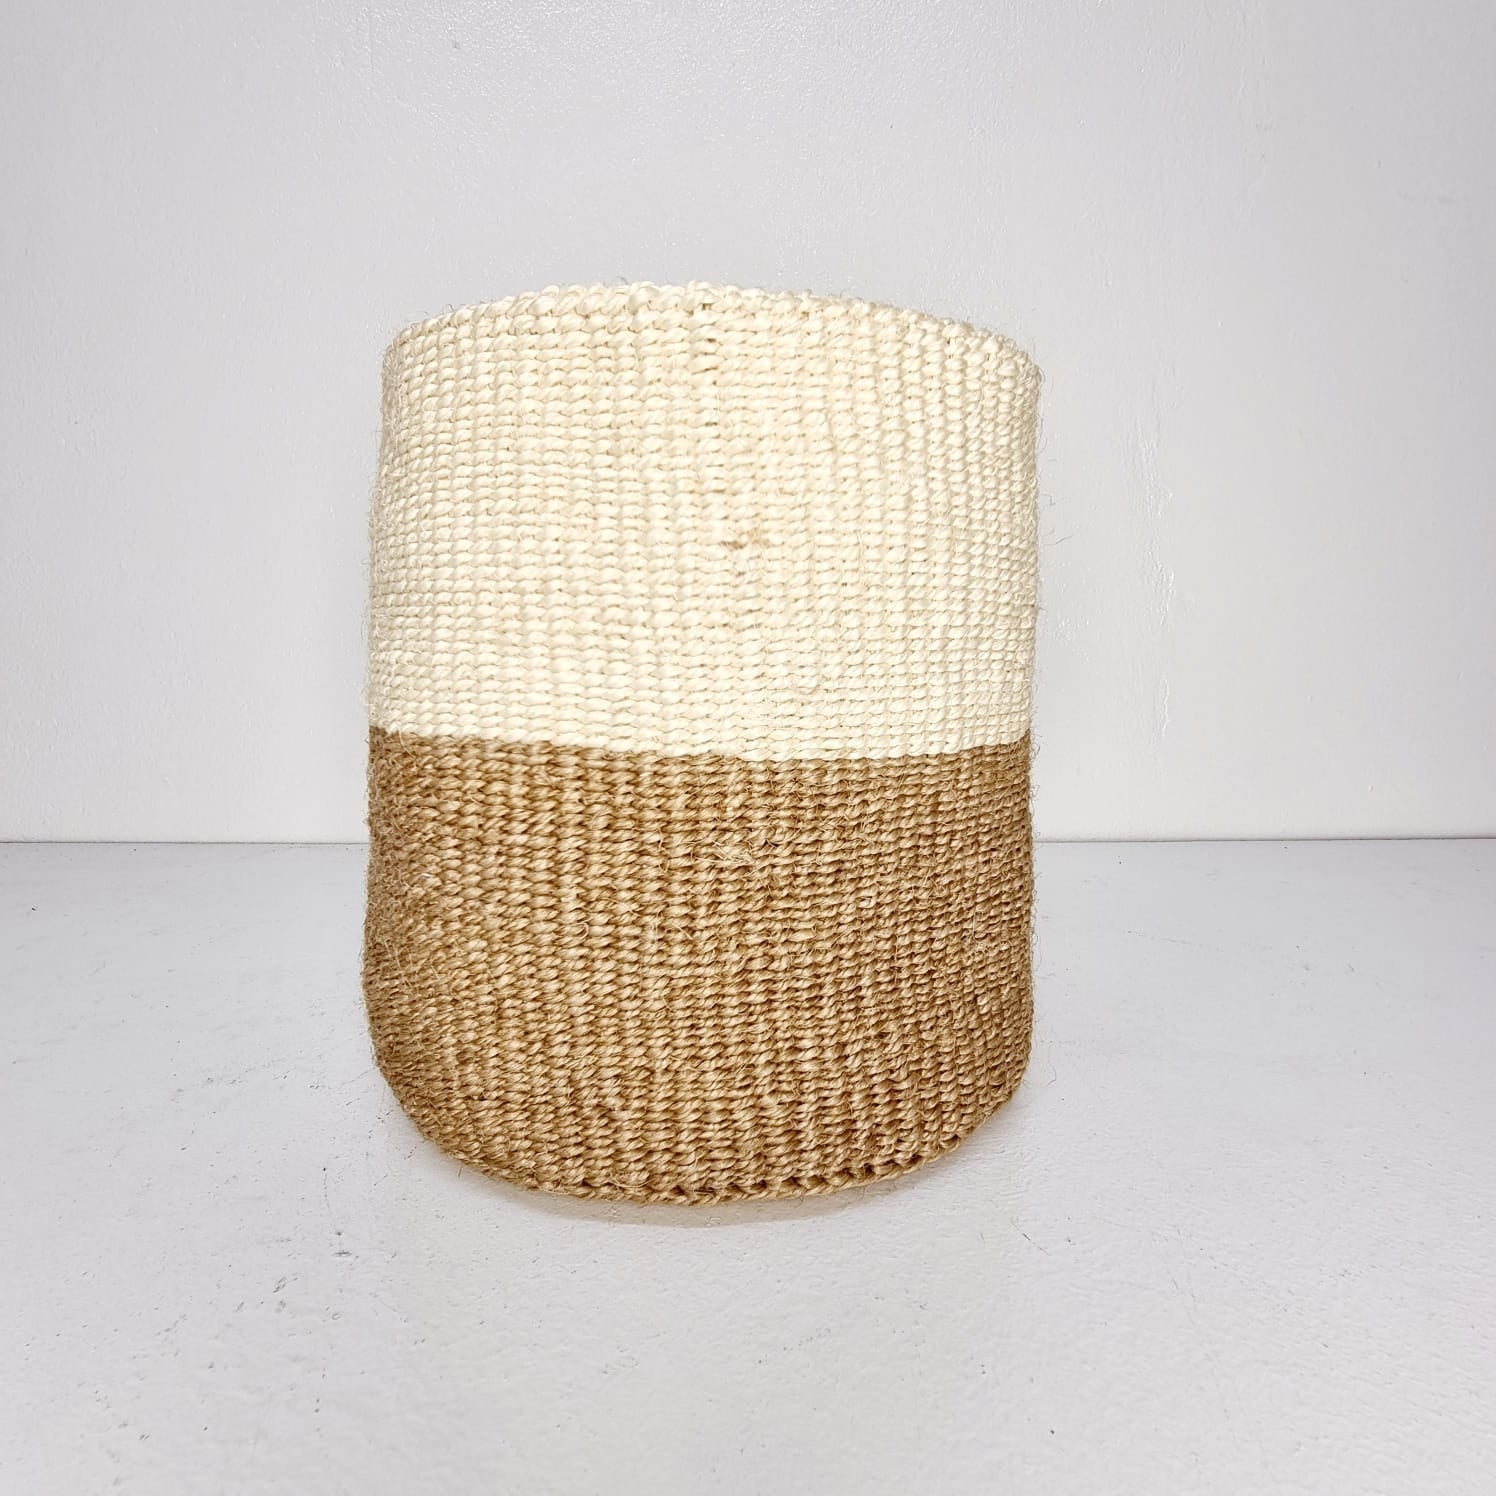 How to Make a Rope Basket Planter with Natural Sisal Rope